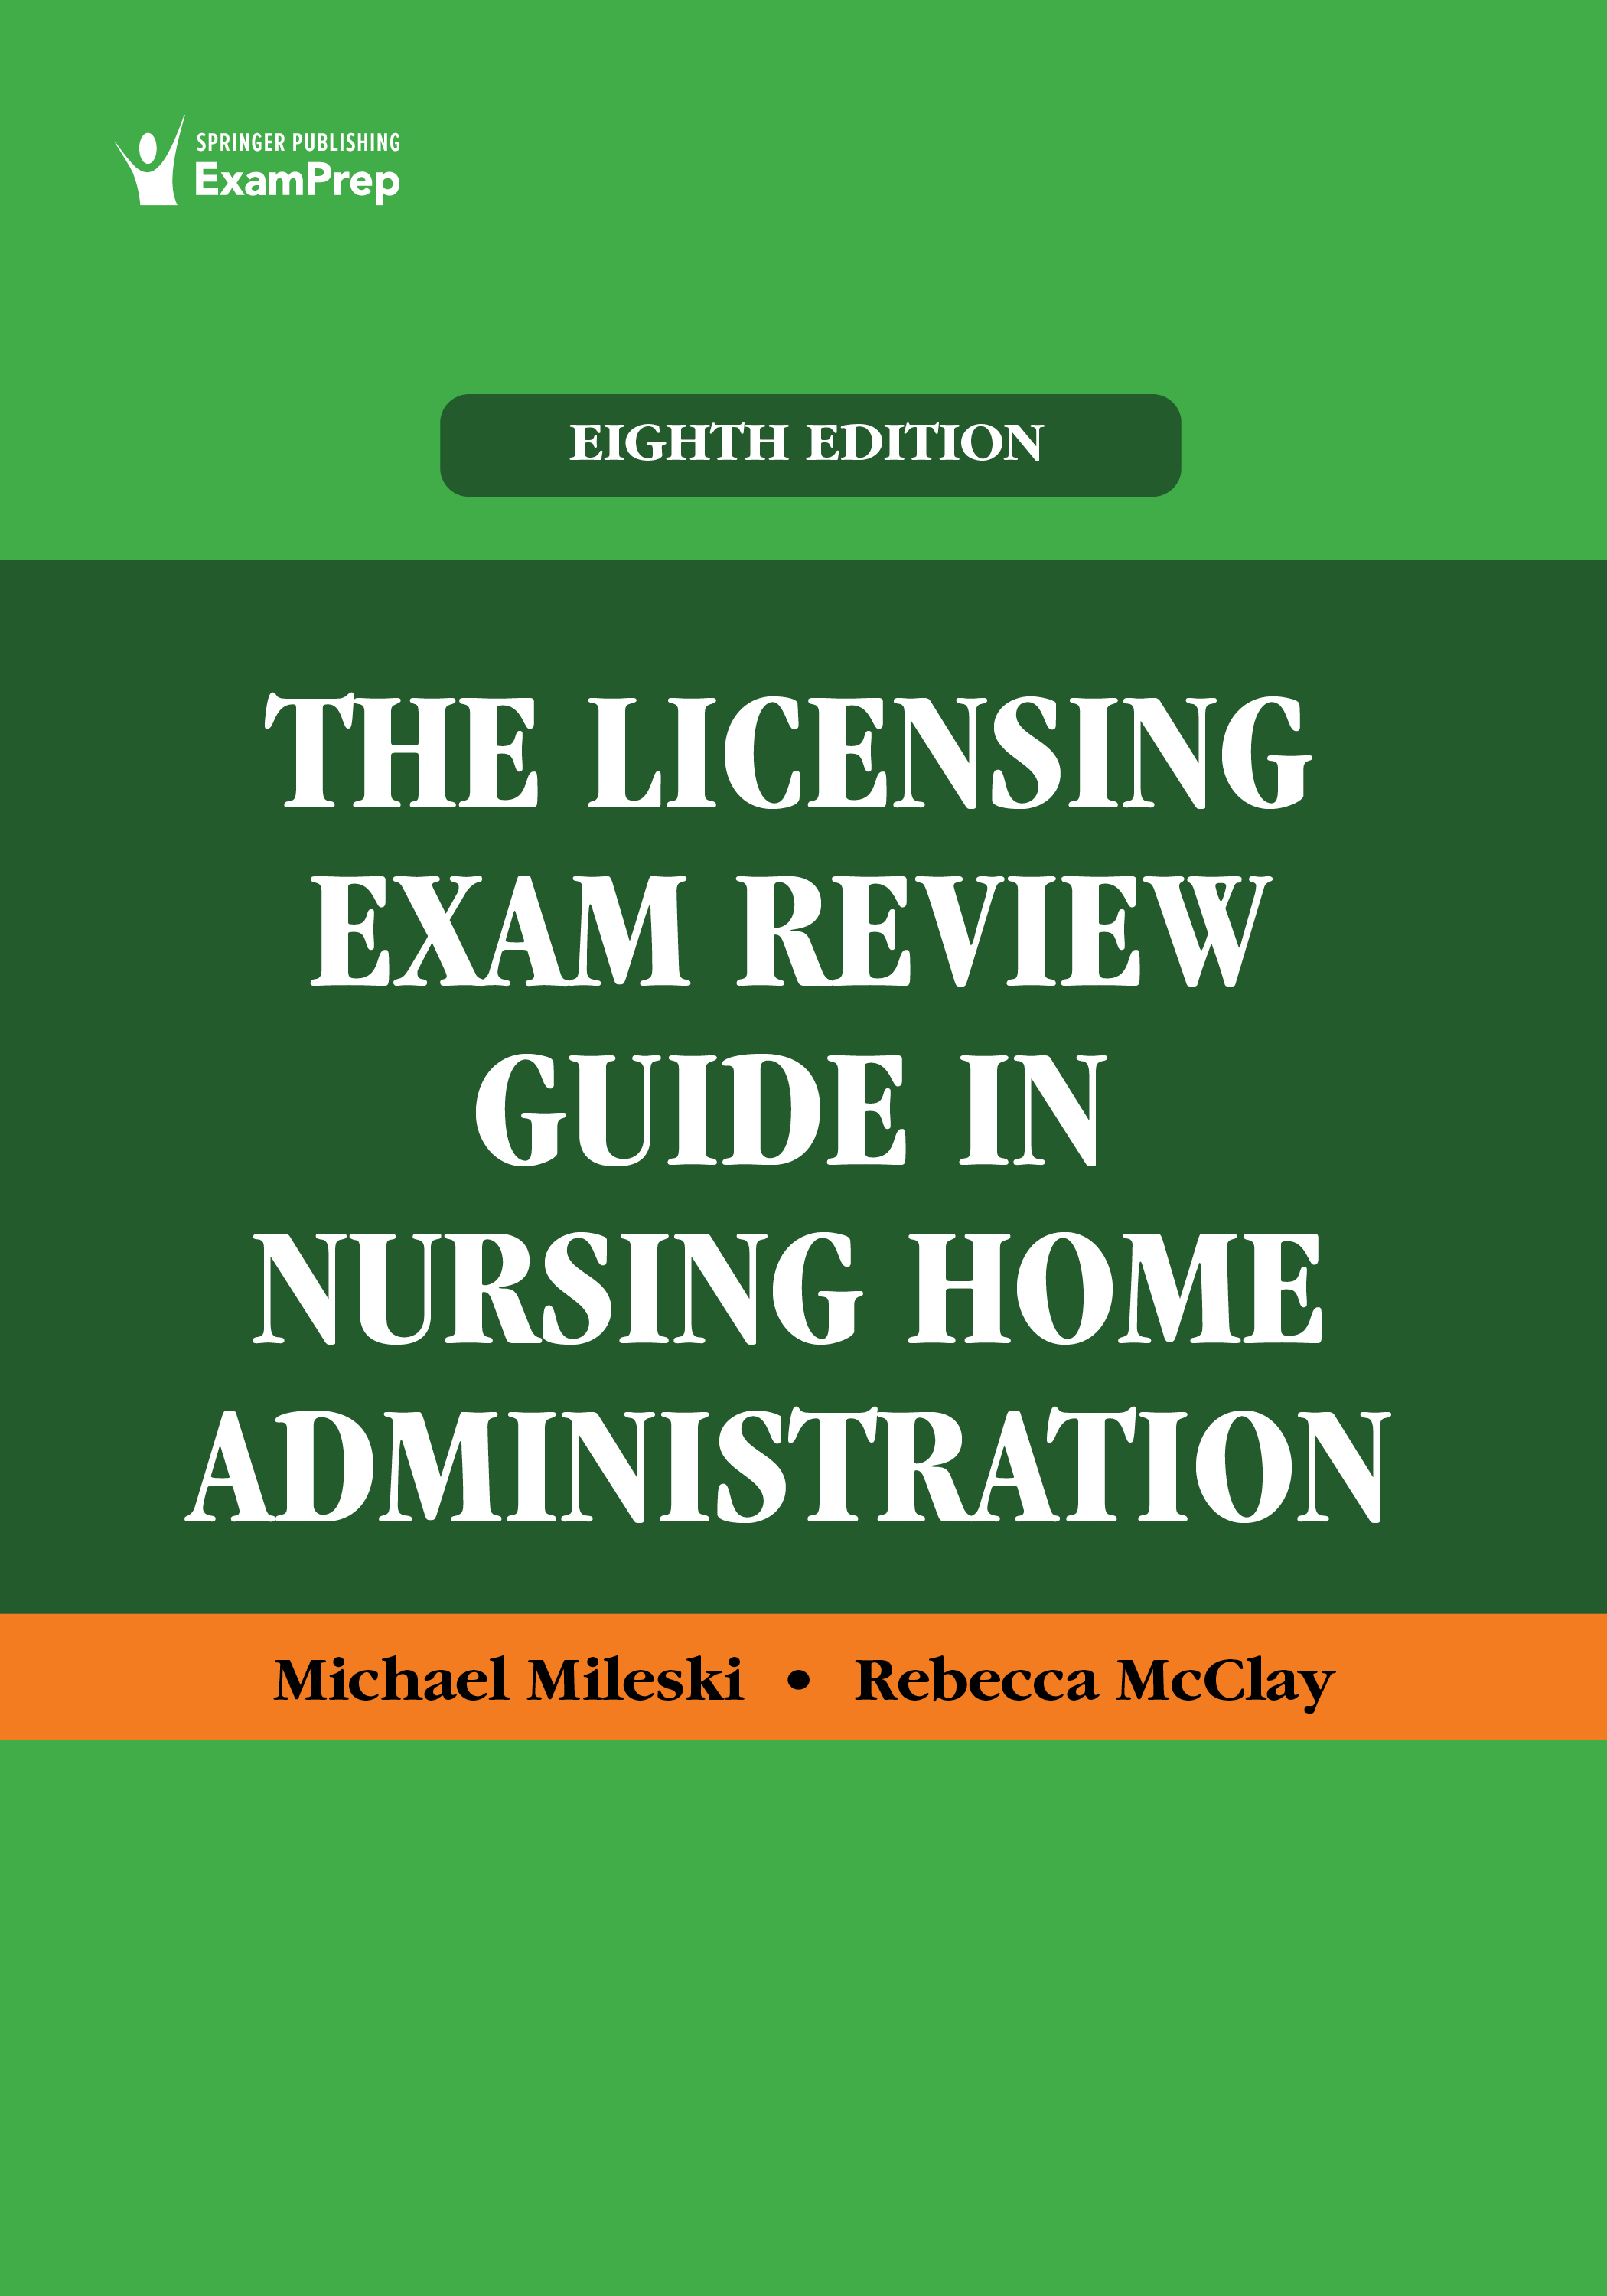 The Licensing Exam Review Guide in Nursing Home Administration